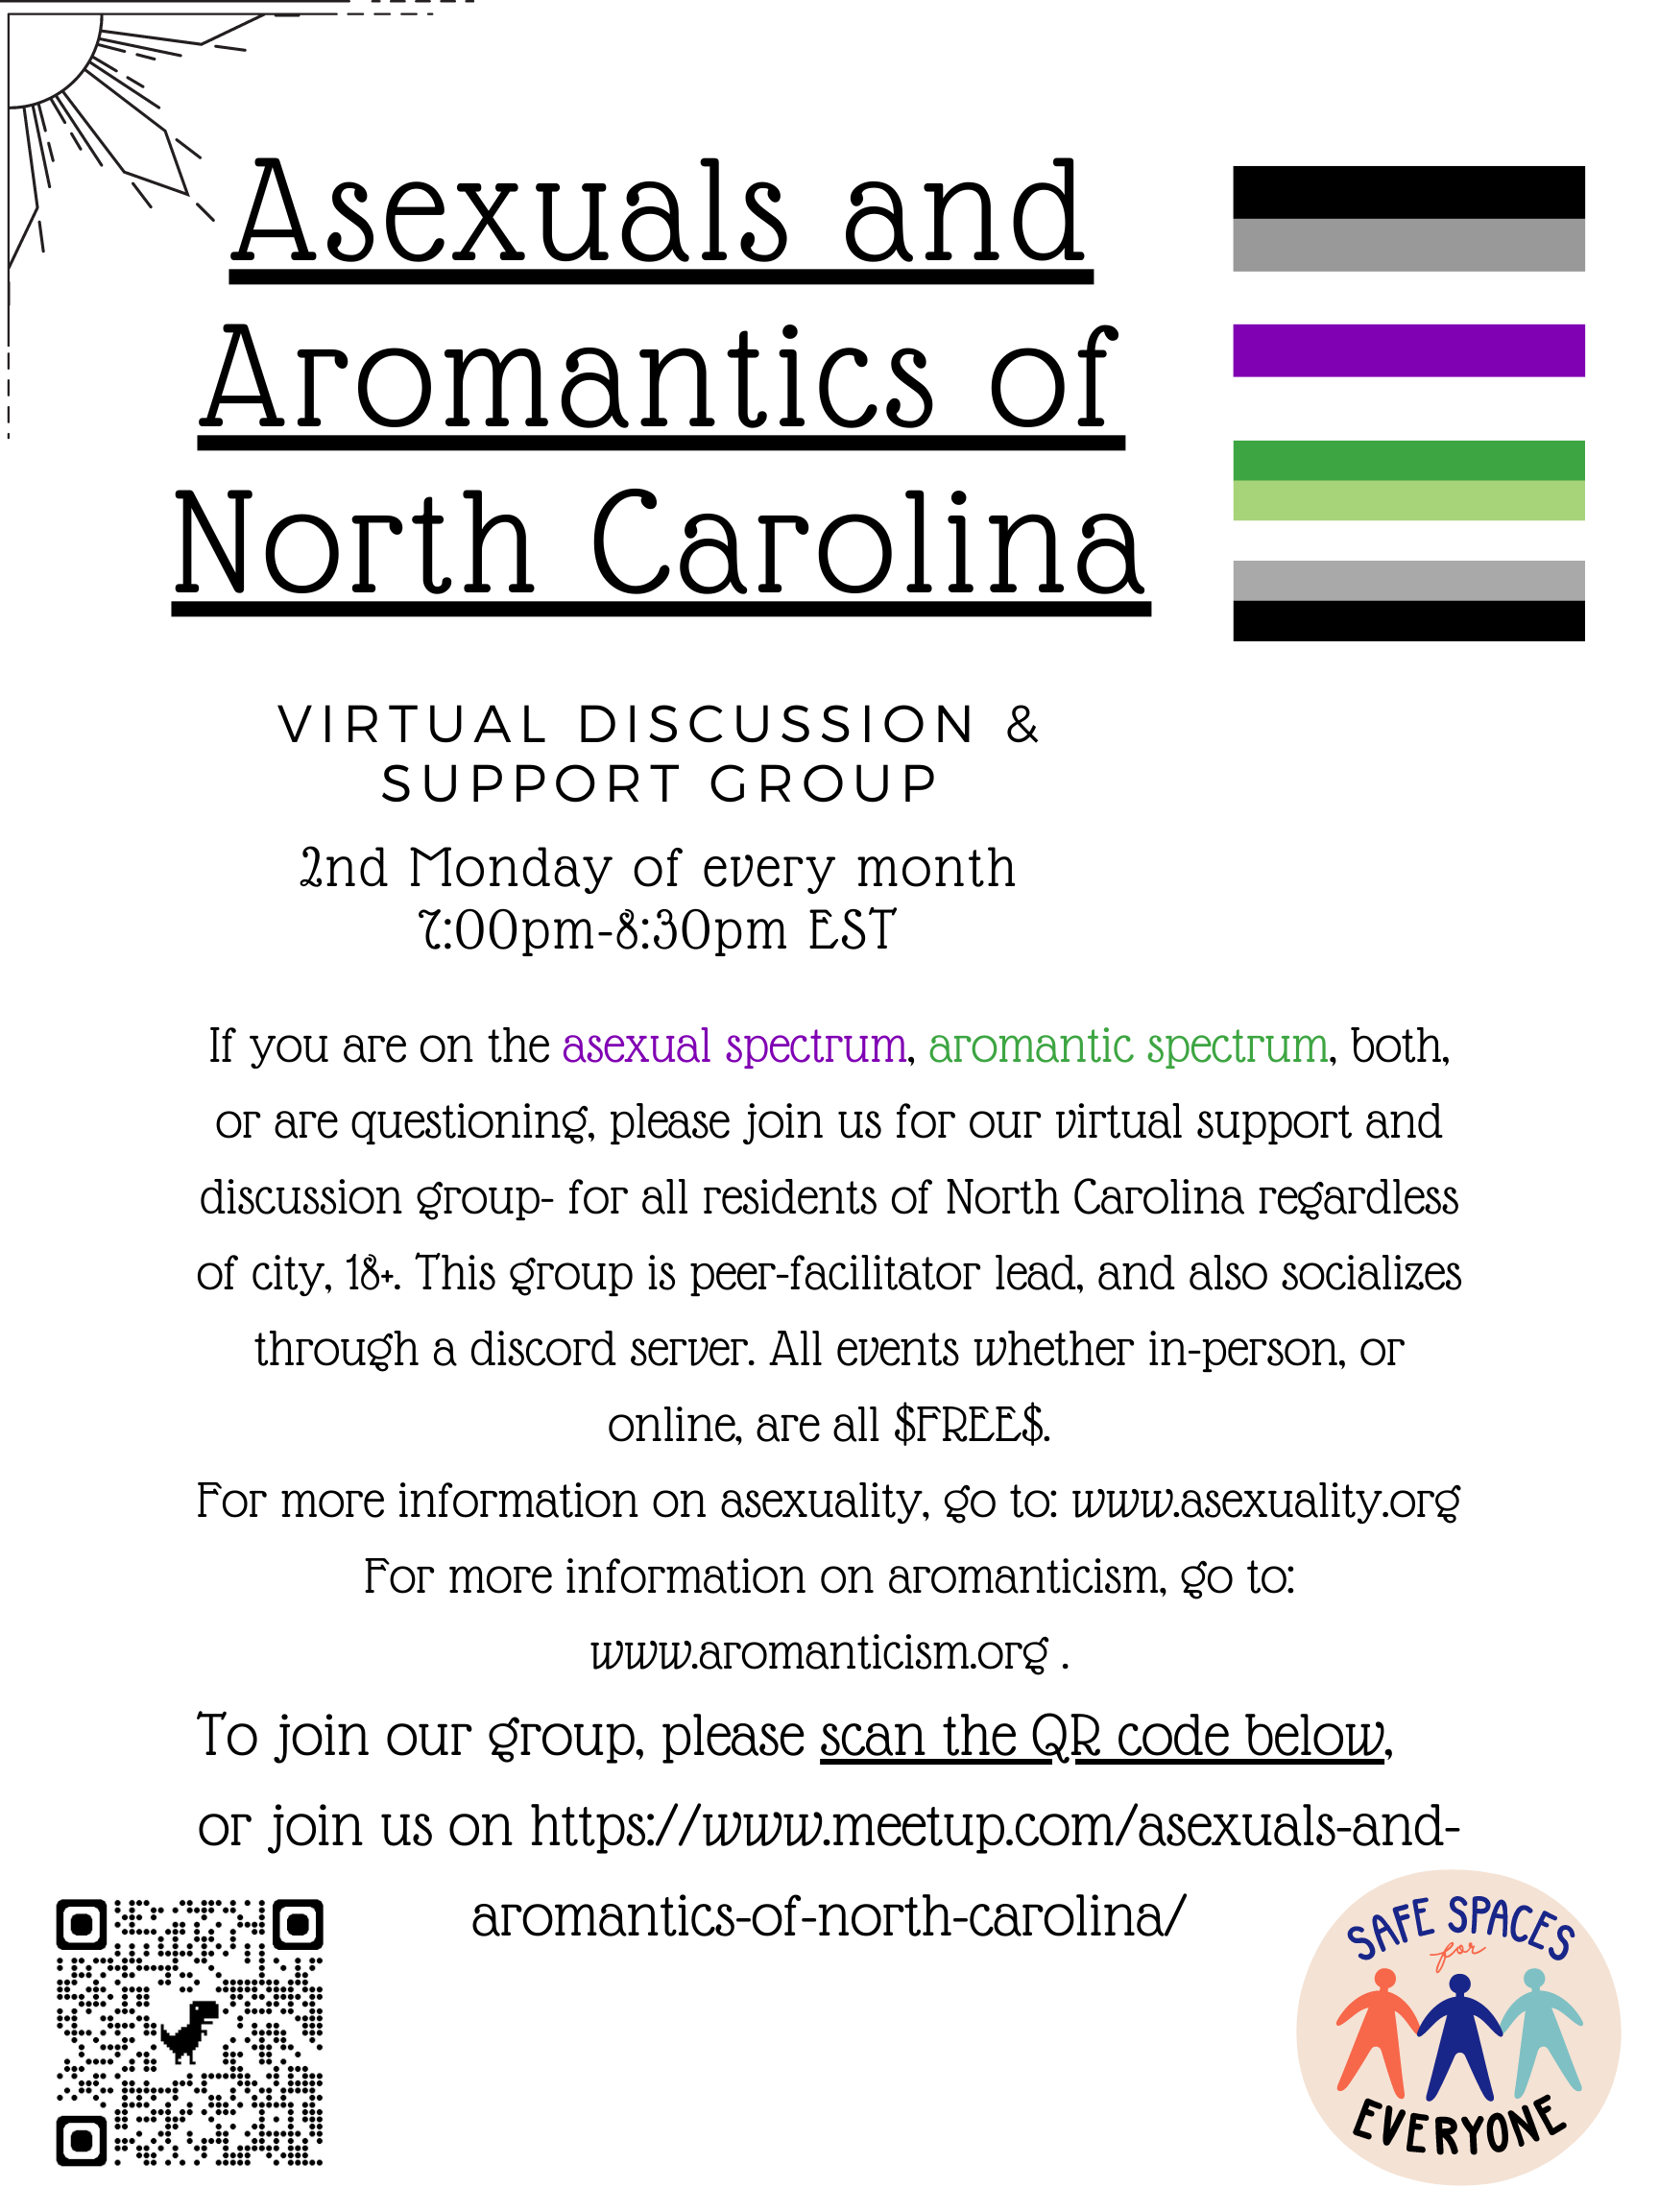 Asexuals and Aromantics of North Carolina. If you are on the asexual spectrum, aromantic spectrum, both, or are questioning, please join us for our virtual support and discussion group— for all residents of North Carolina regardless of city, 18+. This group is peer-facilitator led, and also socializes through a Discord server. All events whether in-person or online are free. For more information on asexuality, go to www.asexuality.org. For more information on aromanticism, go to www.aromanticism.org.